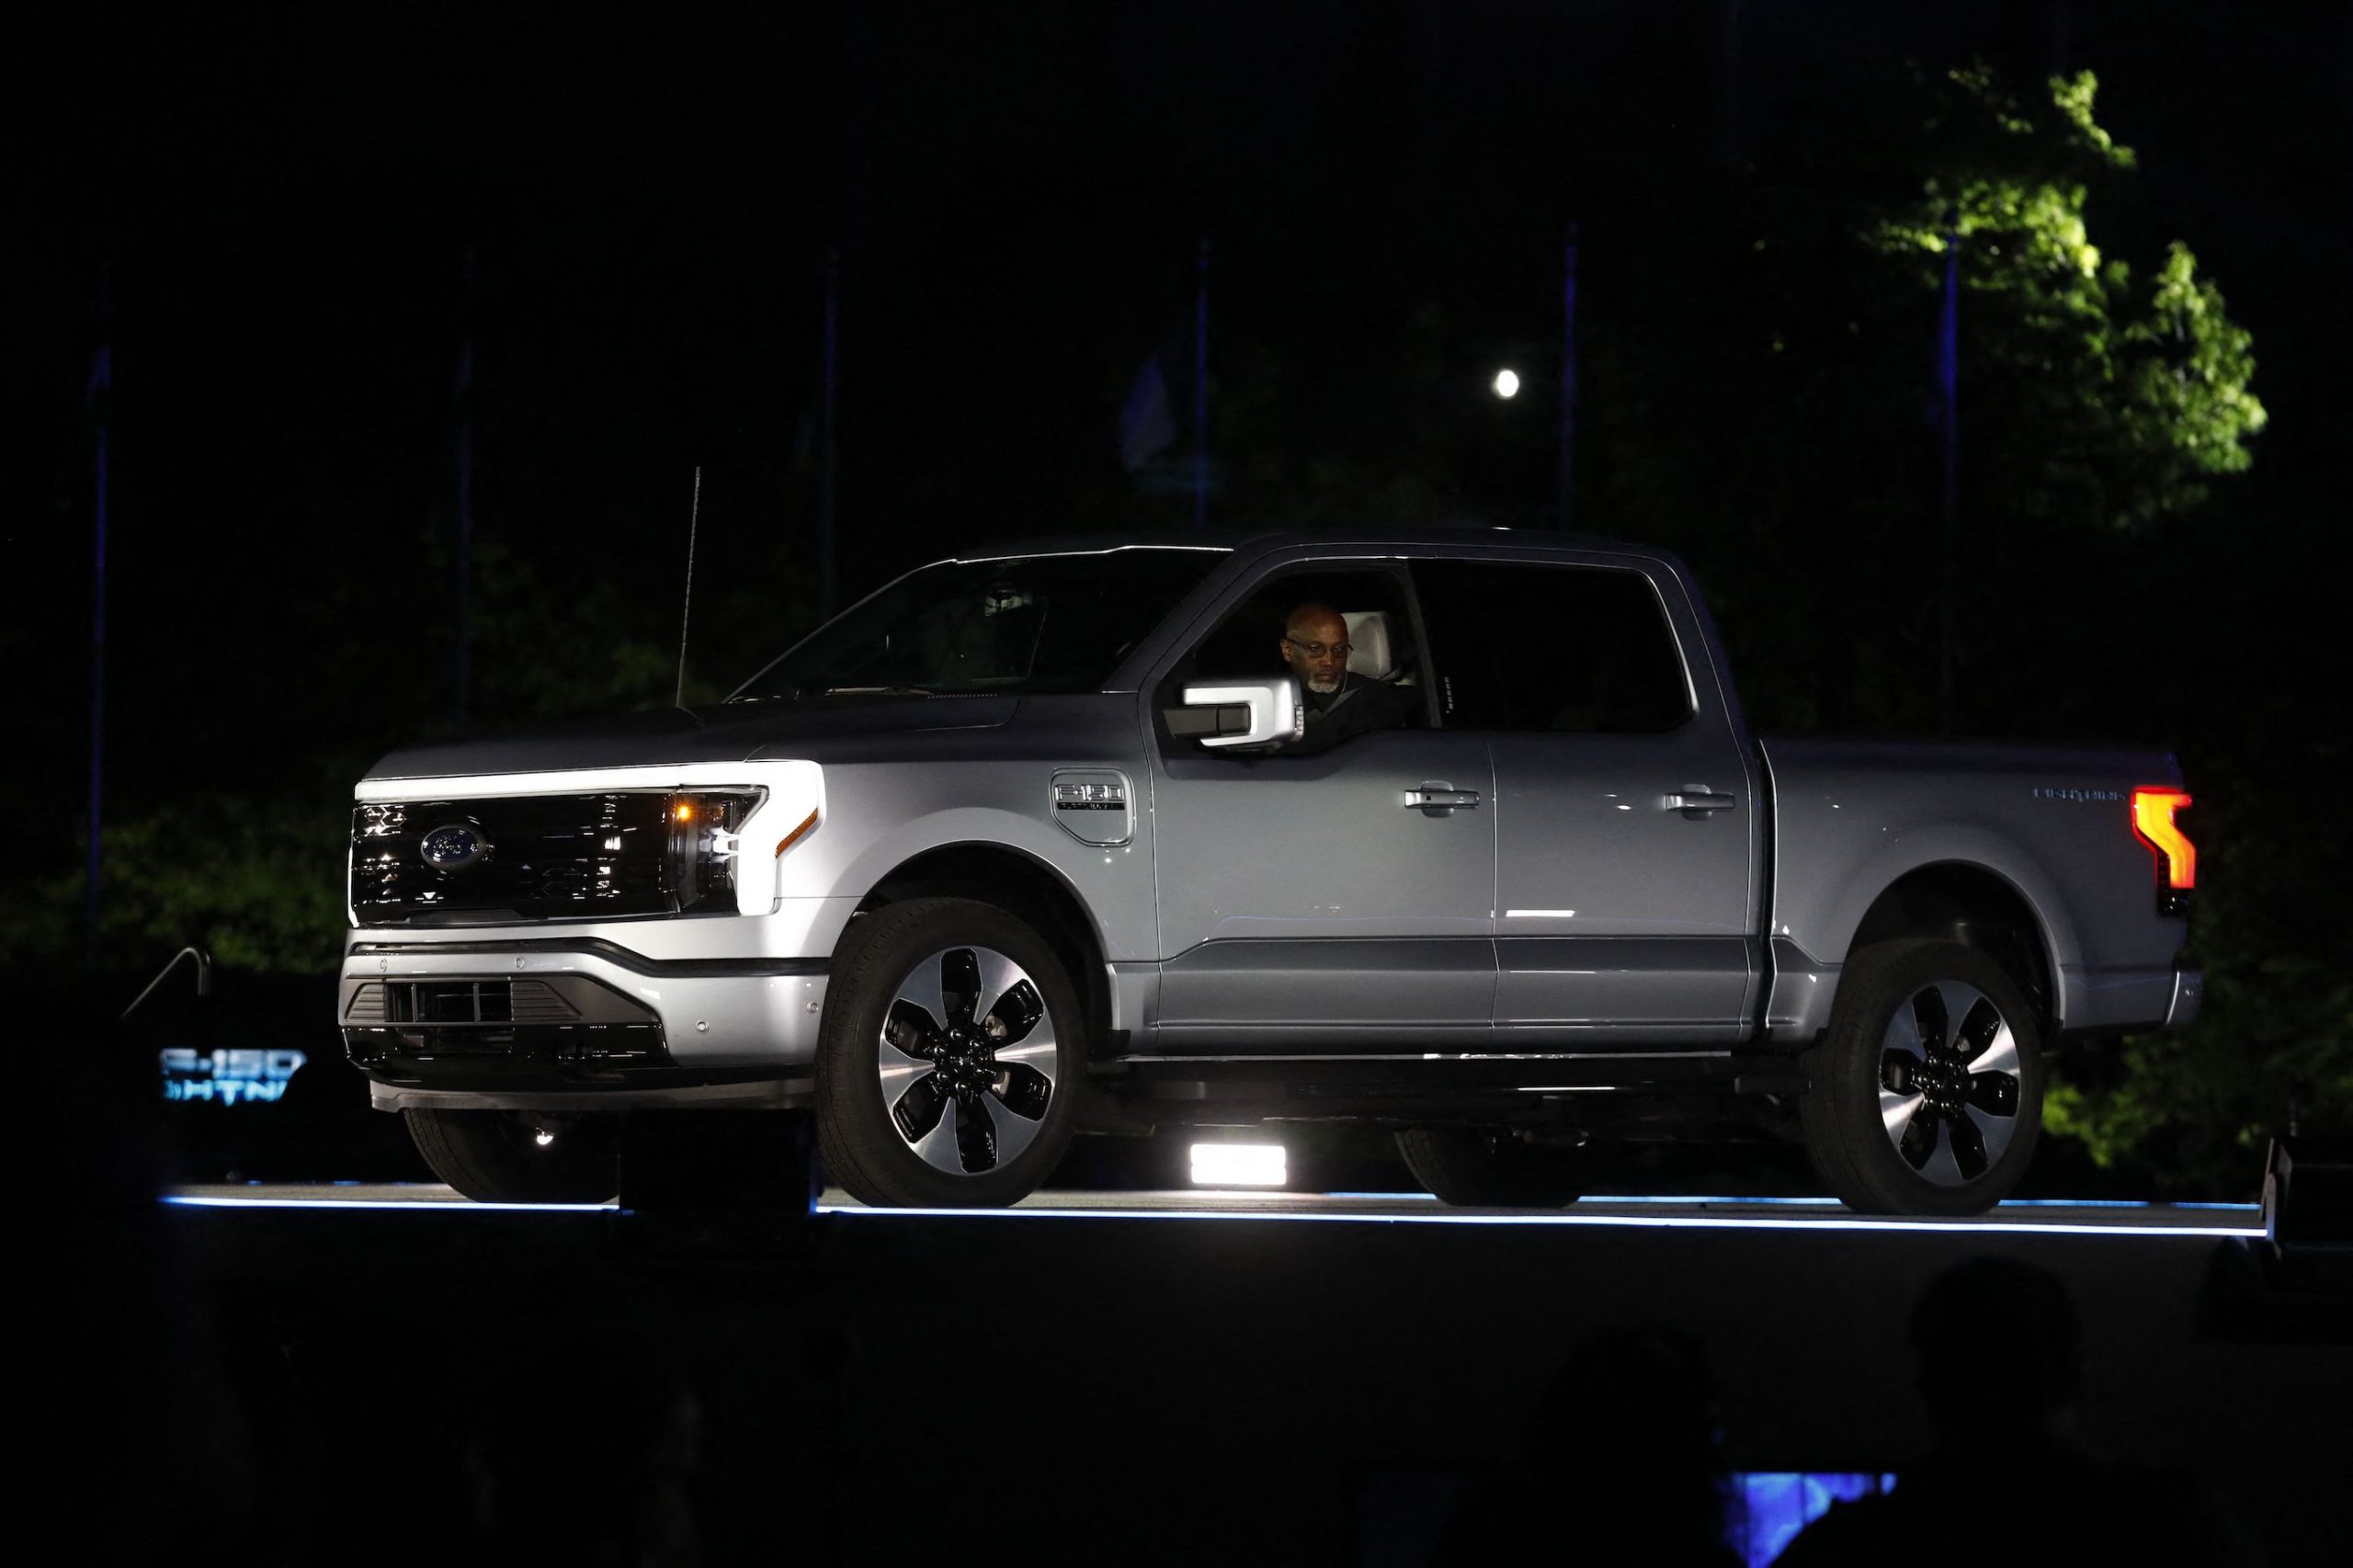 Ford Motor Company' unveils its new electric silver Ford F-150 Lightning outside of their headquarters in Dearborn, Michigan